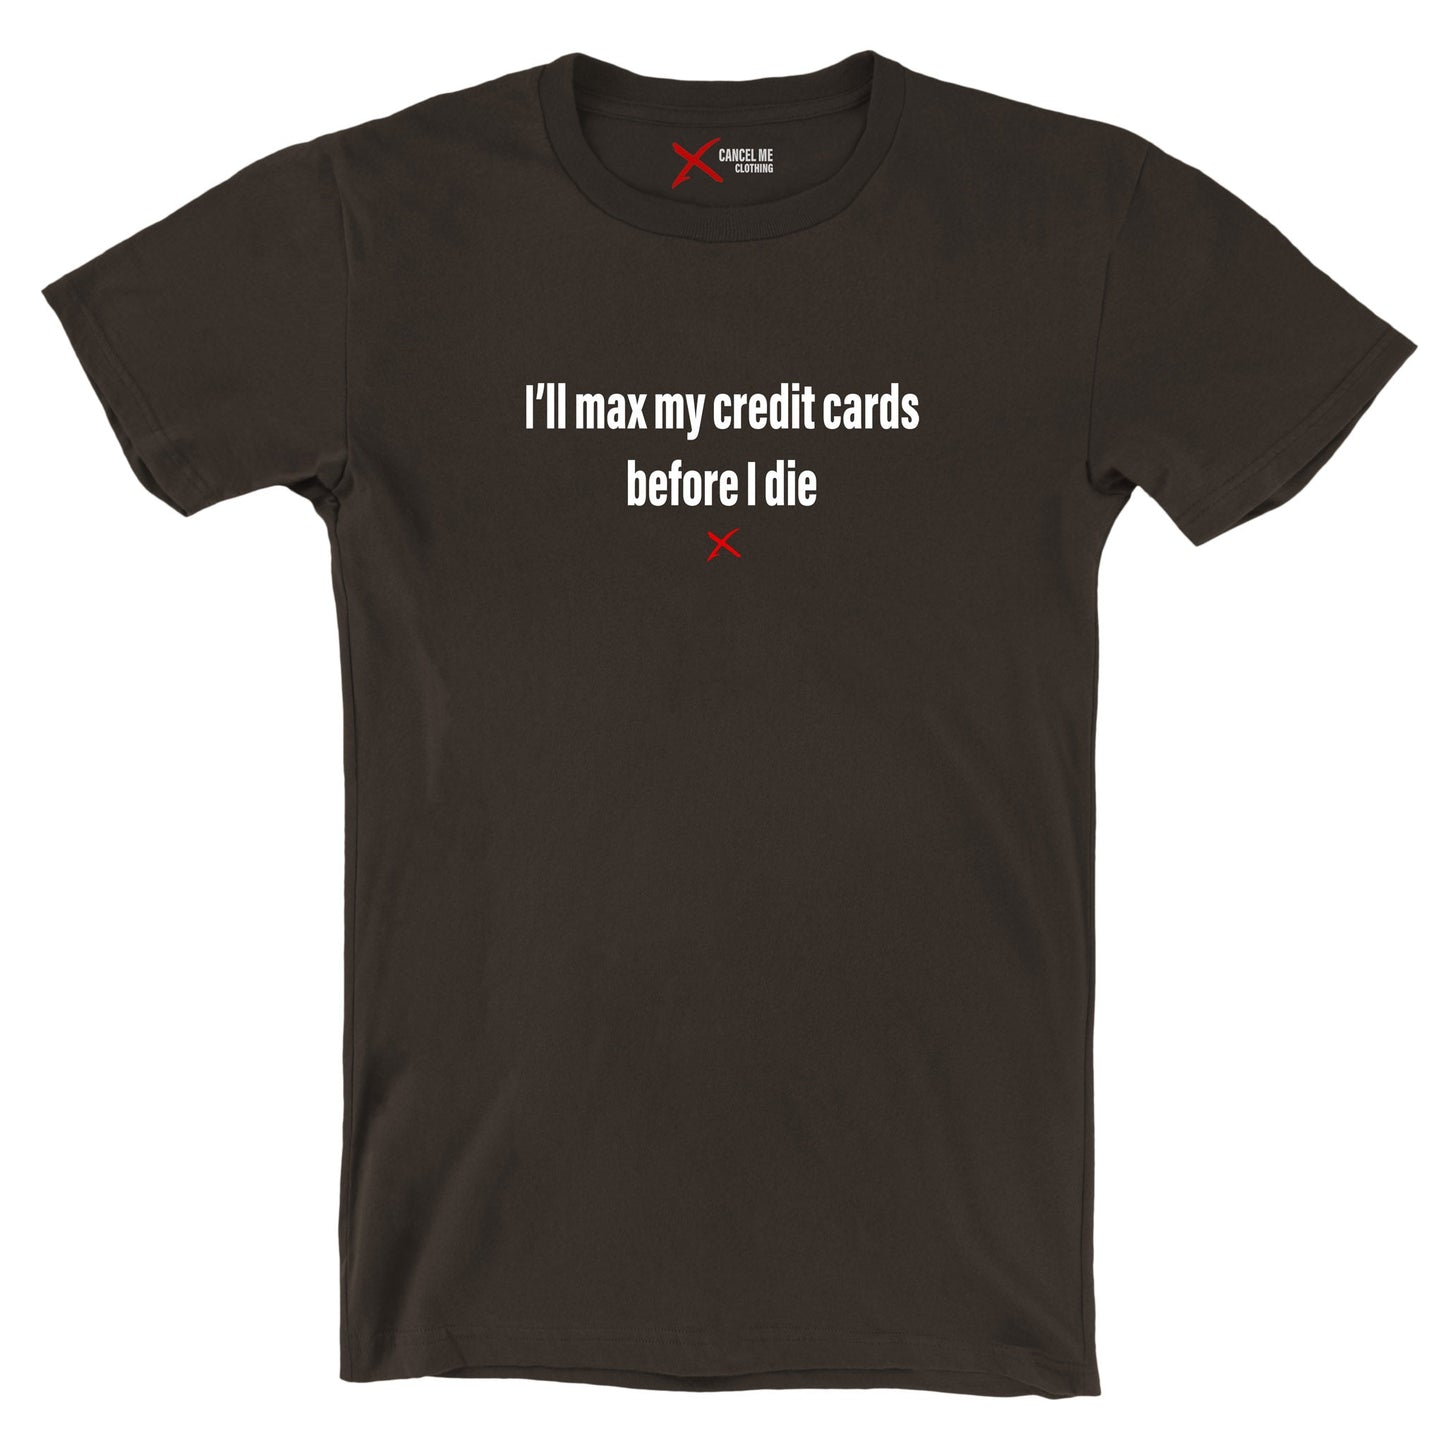 I'll max my credit cards before I die - Shirt